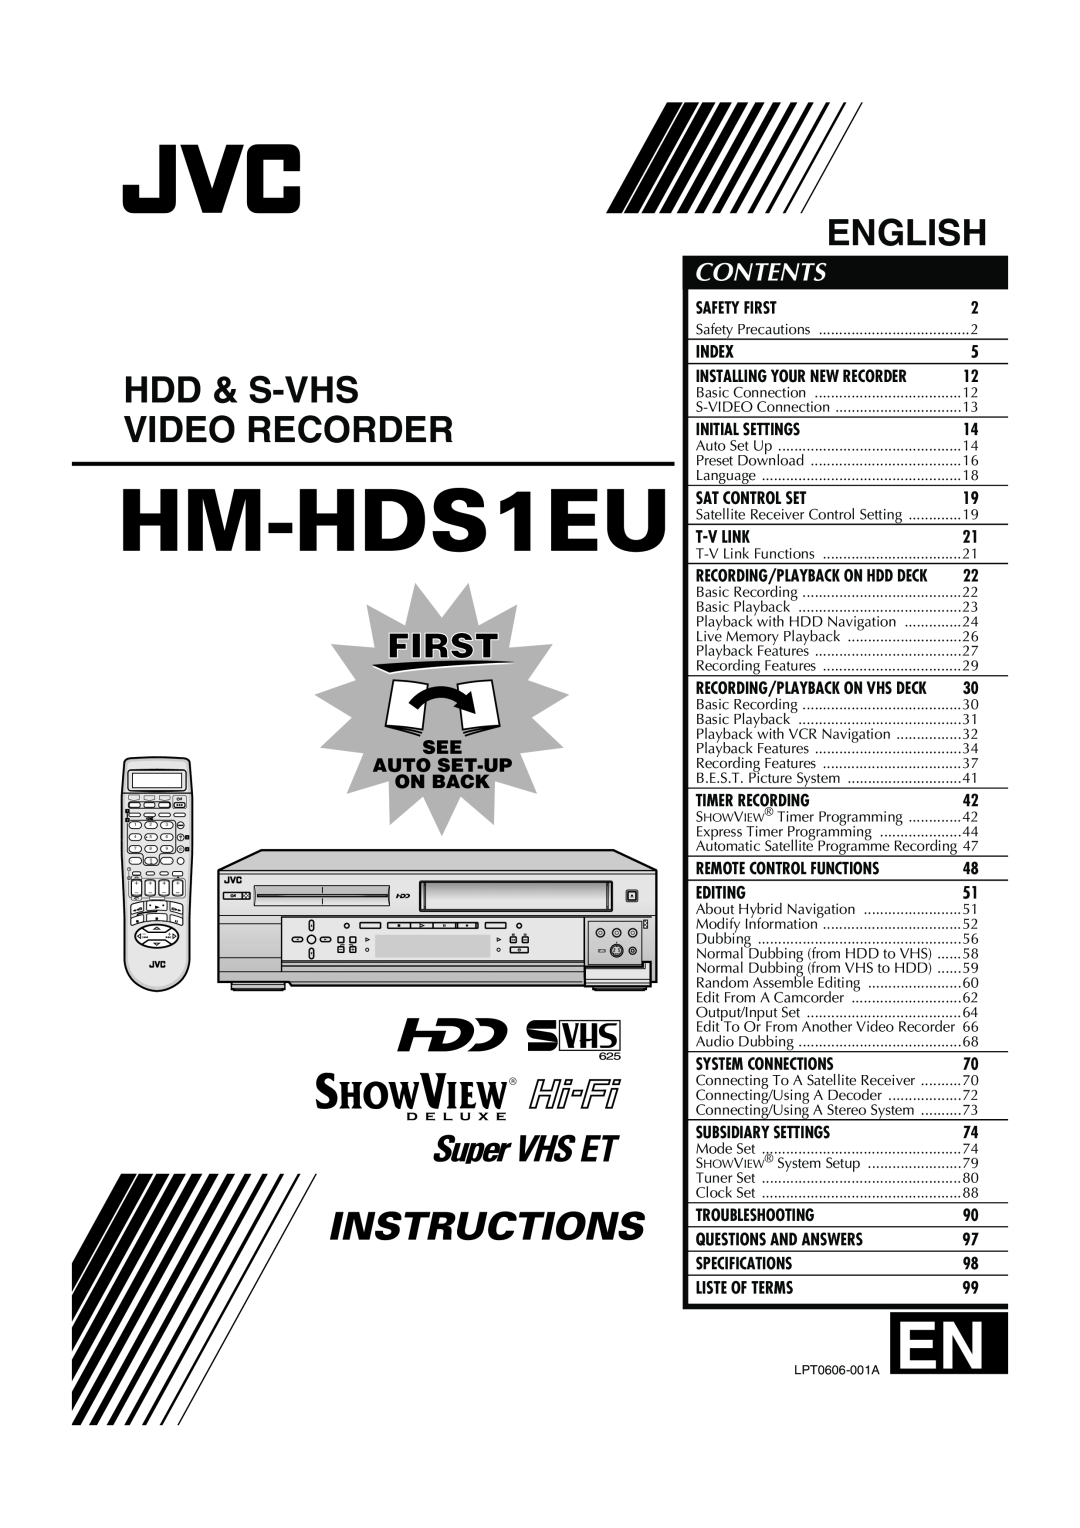 JVC HM-HDS1EU specifications Hdd & S-Vhs Video Recorder, English, Contents, Safety First, Index, Initial Settings, Editing 